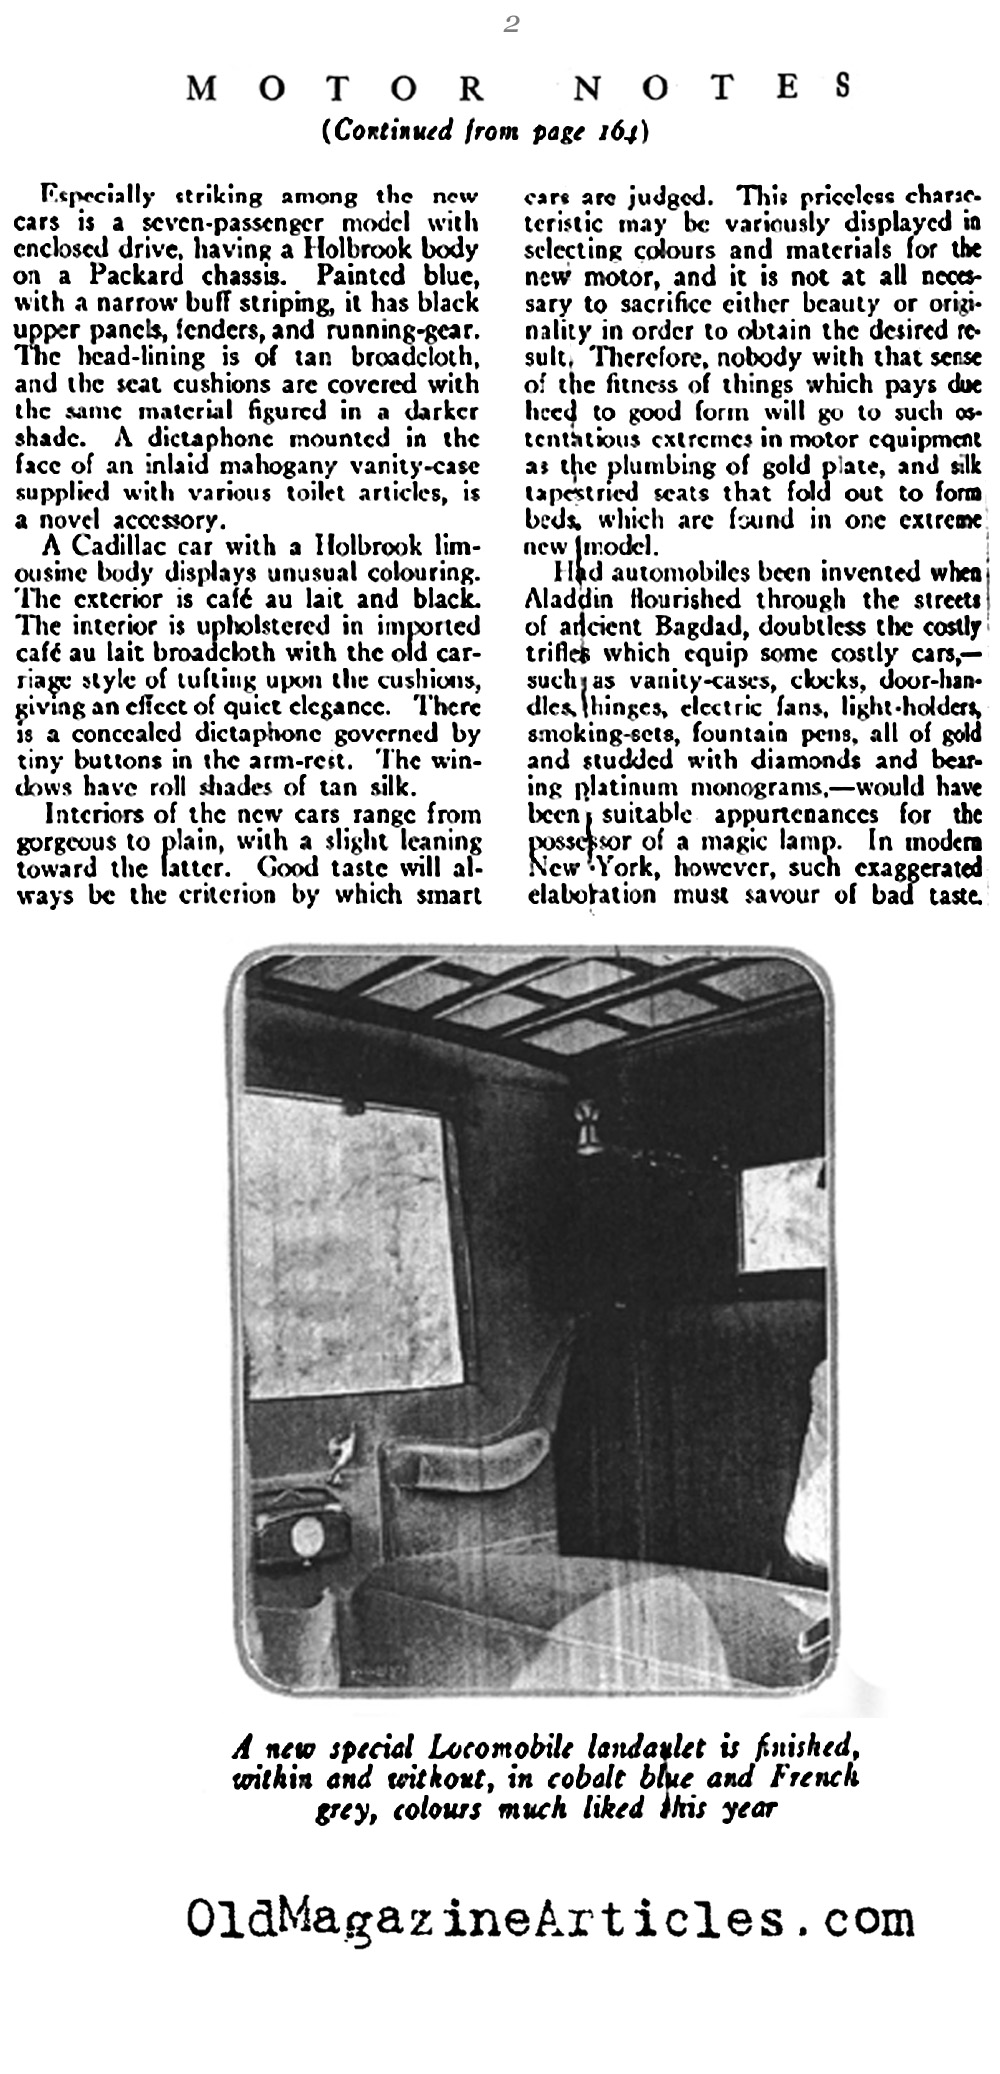 Upholstery in the Finest Luxury Cars of 1920 (Vogue Magazine, 1920)